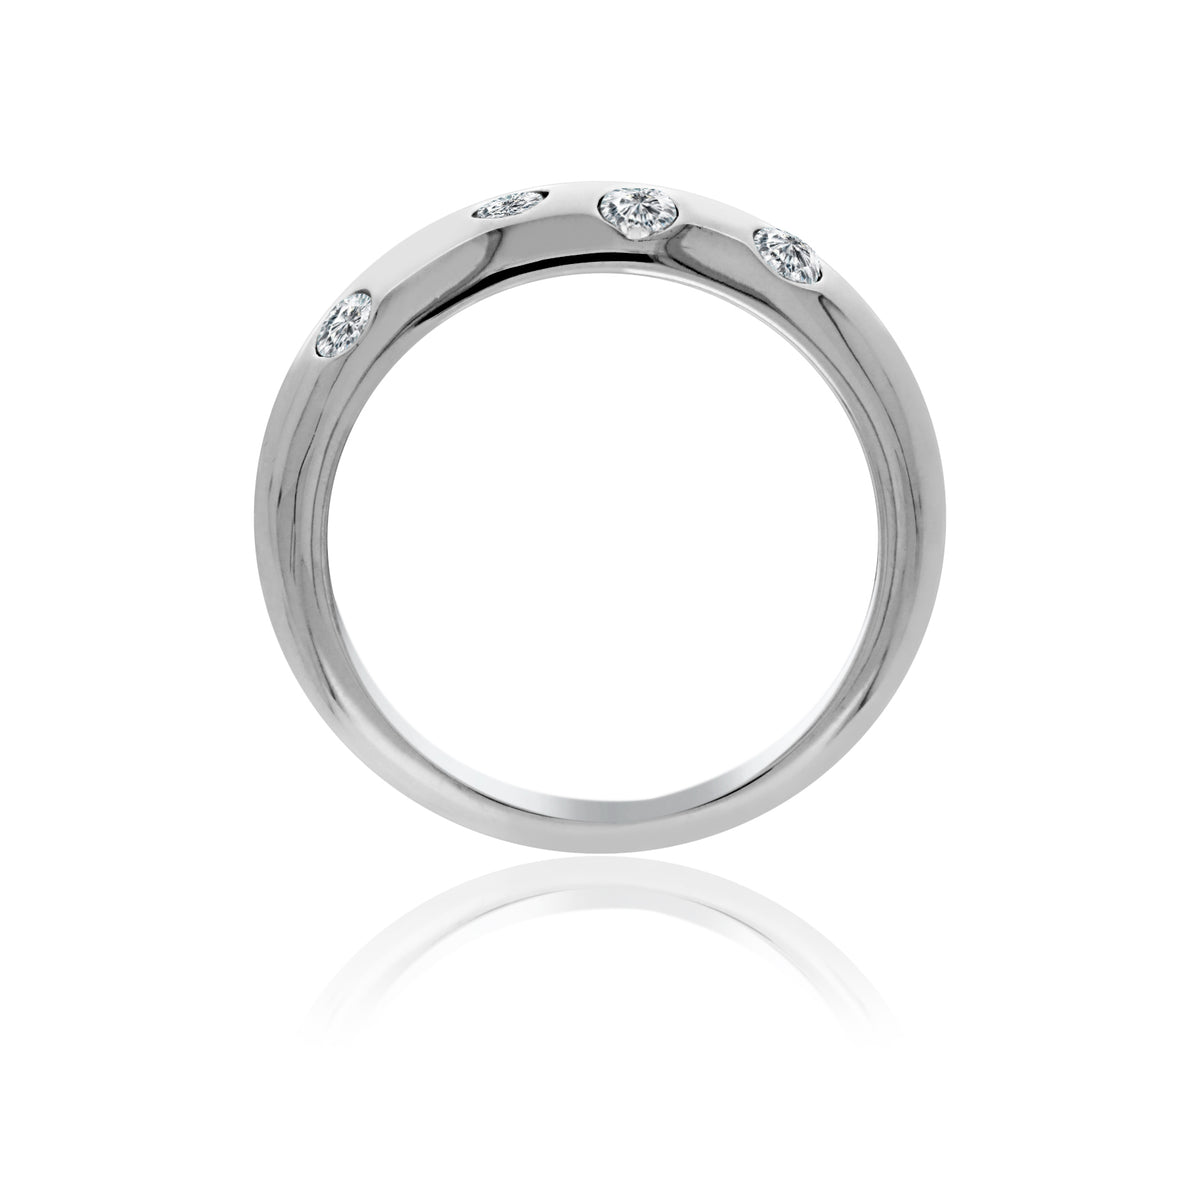 Silver Dome Ring Set With Round Cz's